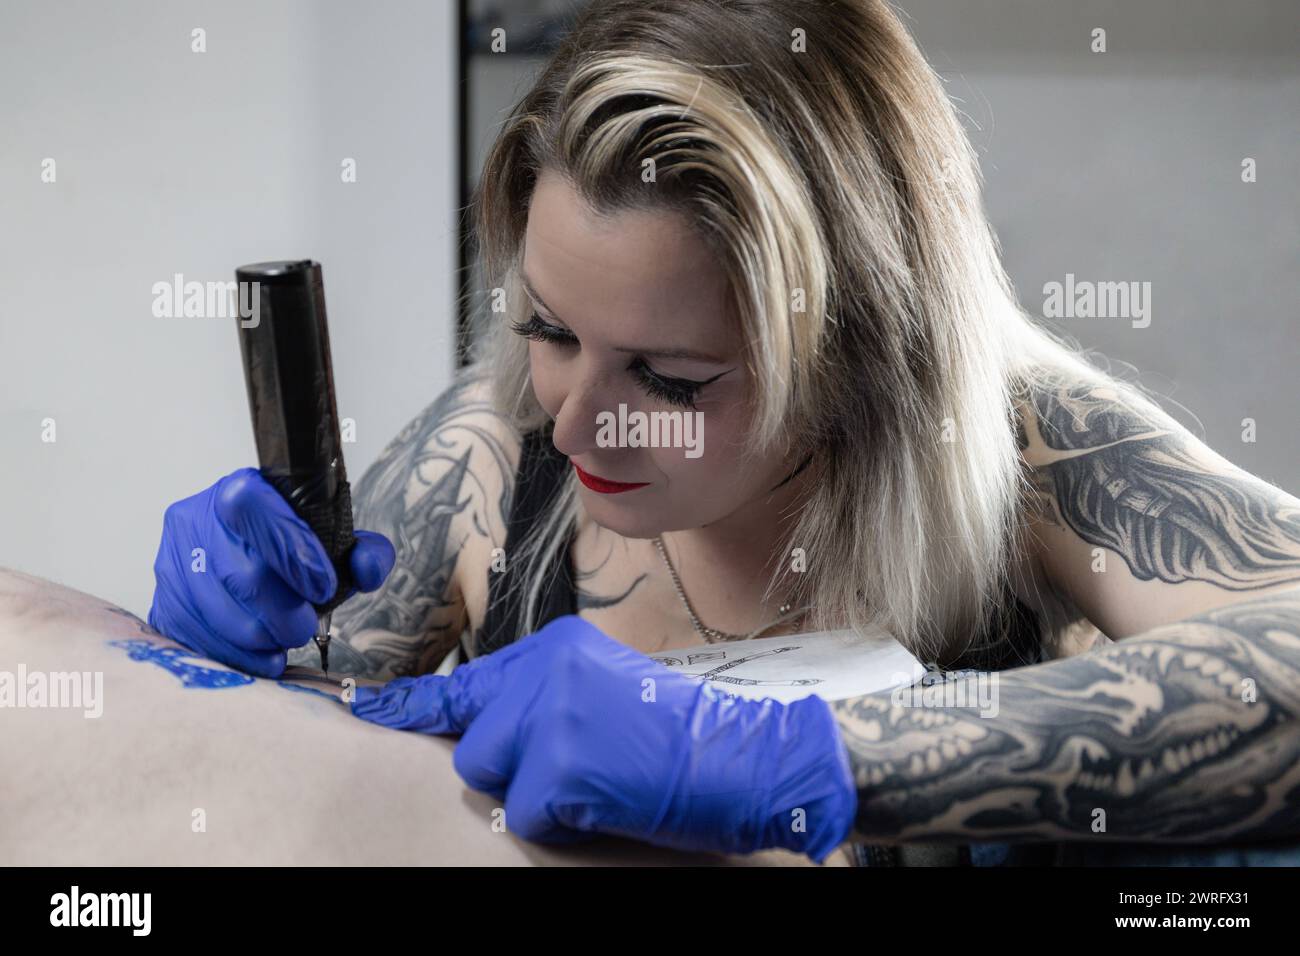 Horizontal photo a dedicated tattooist with full sleeve tattoos applies her craft, etching a design onto a client's body in her studio. Concept busine Stock Photo